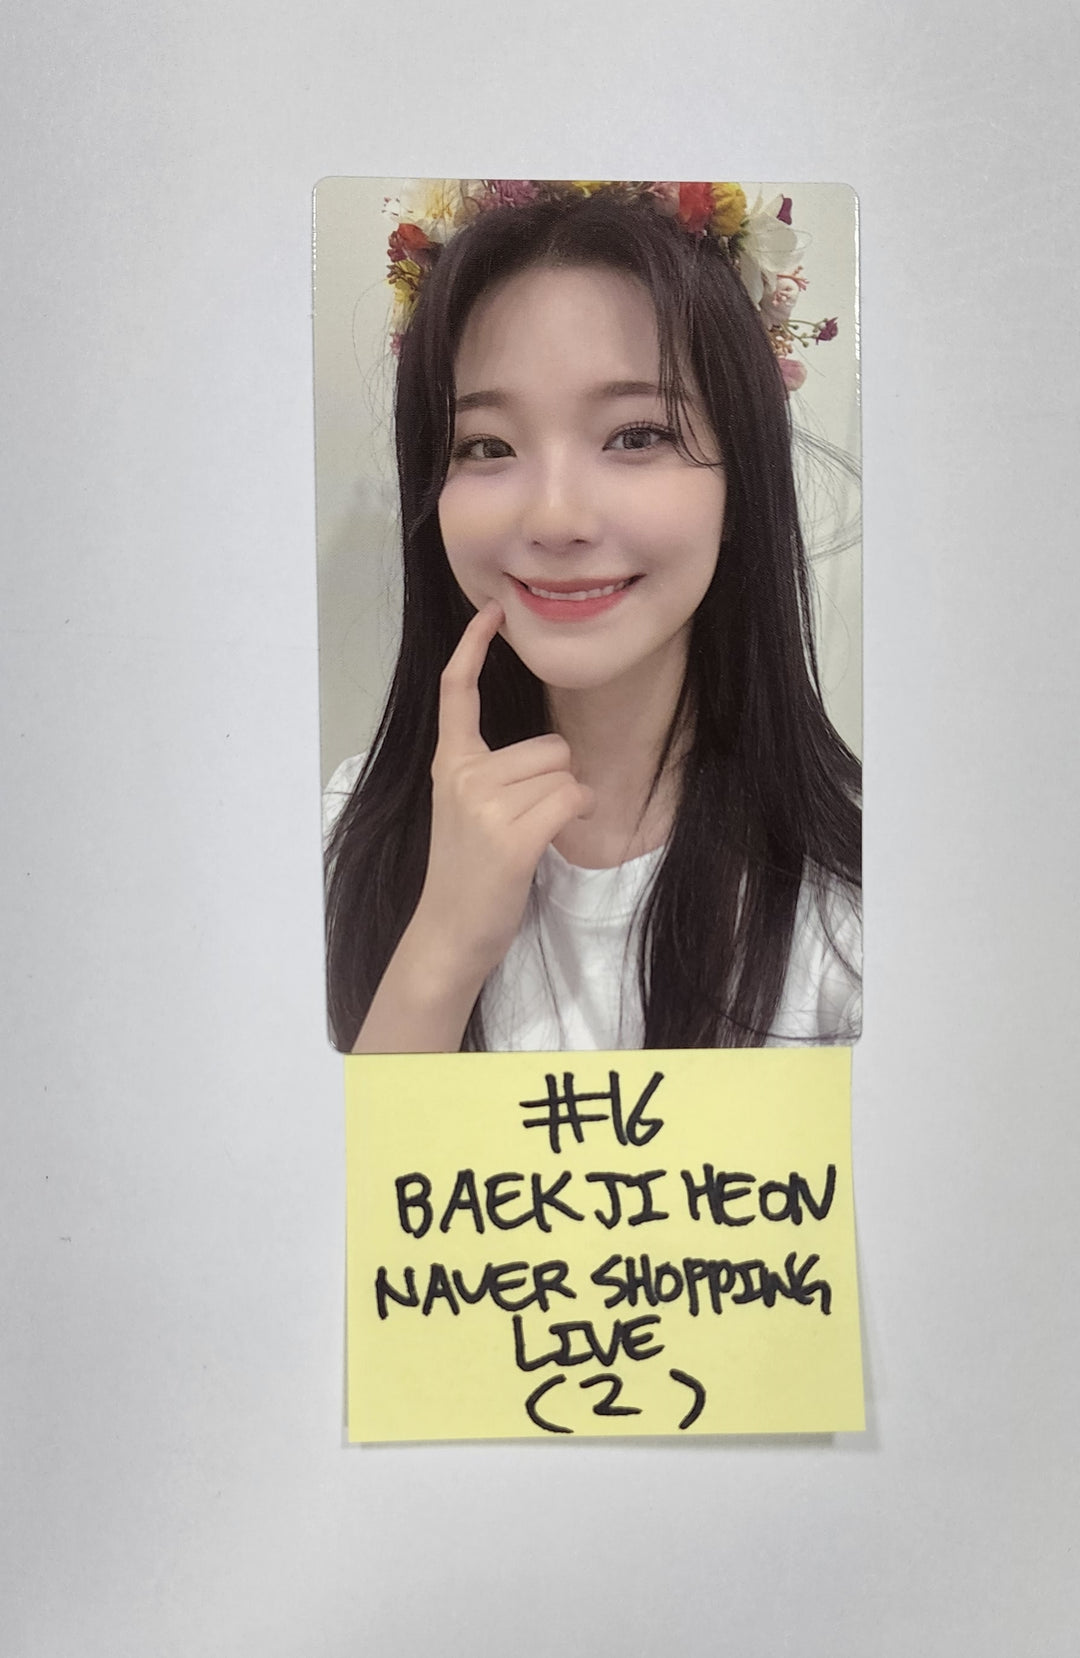 Fromis_9 "from our Memento Box" - Naver Shopping Live Weverse Shop Pre-Order Benefit Photocard / Hologram Photocard